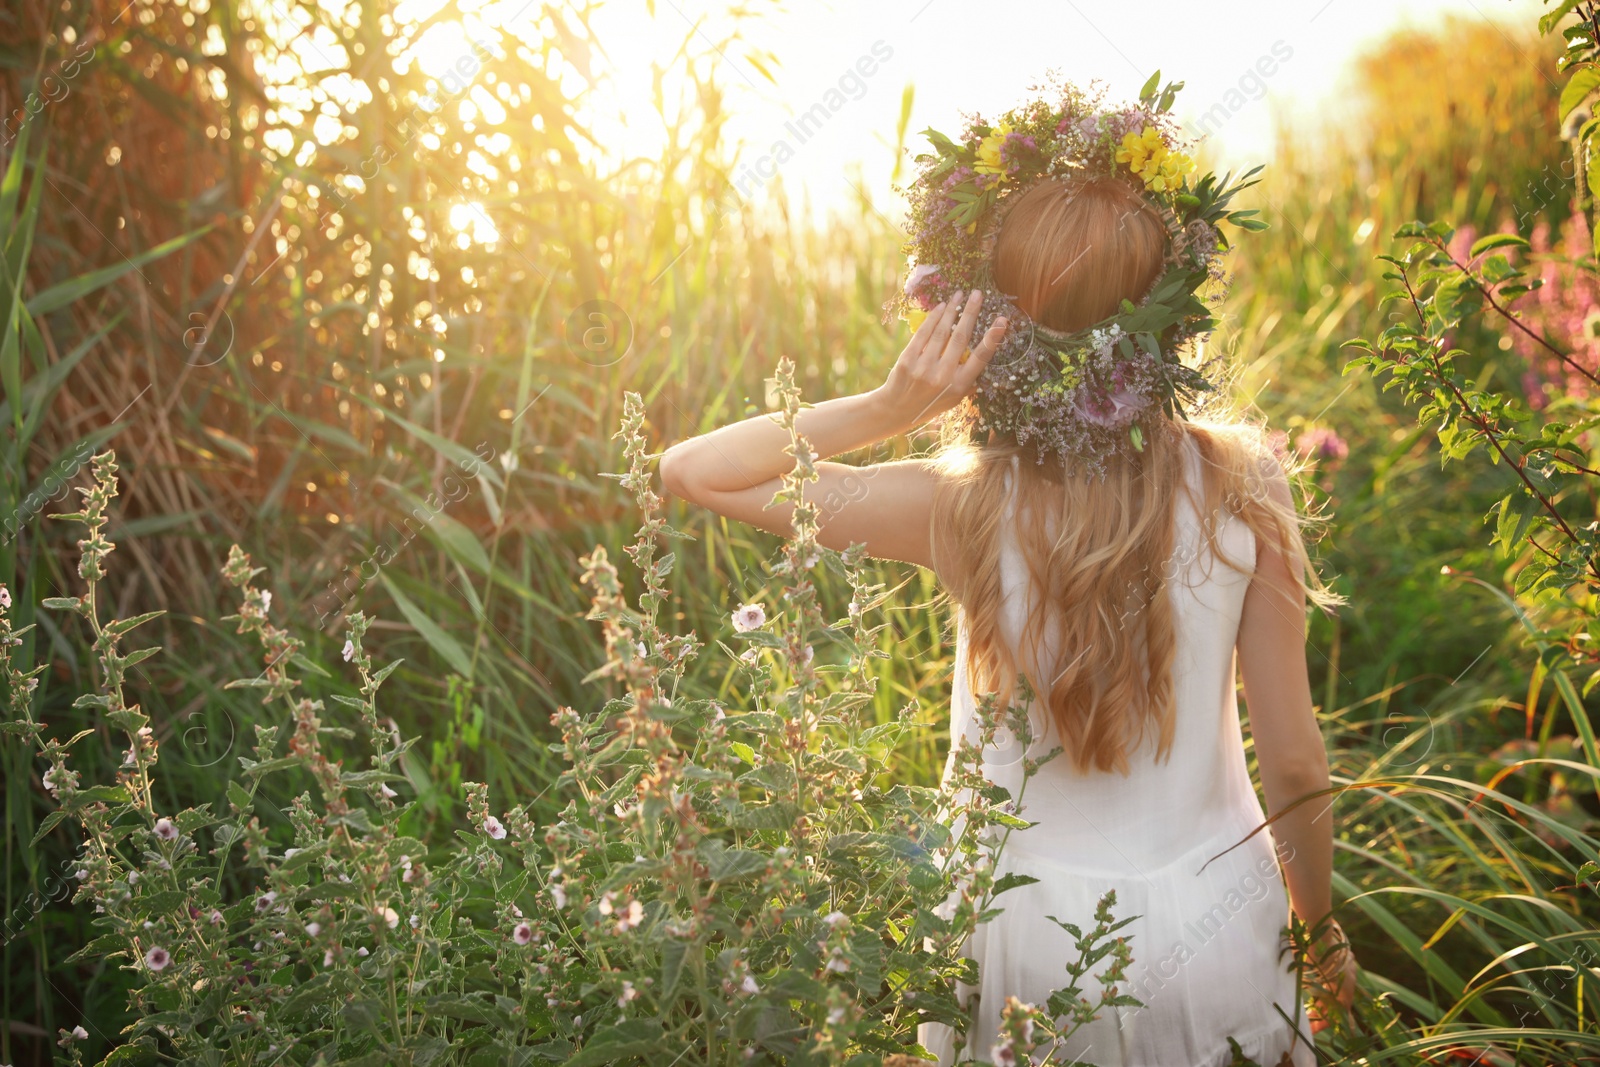 Photo of Young woman wearing wreath made of beautiful flowers outdoors on sunny day, back view